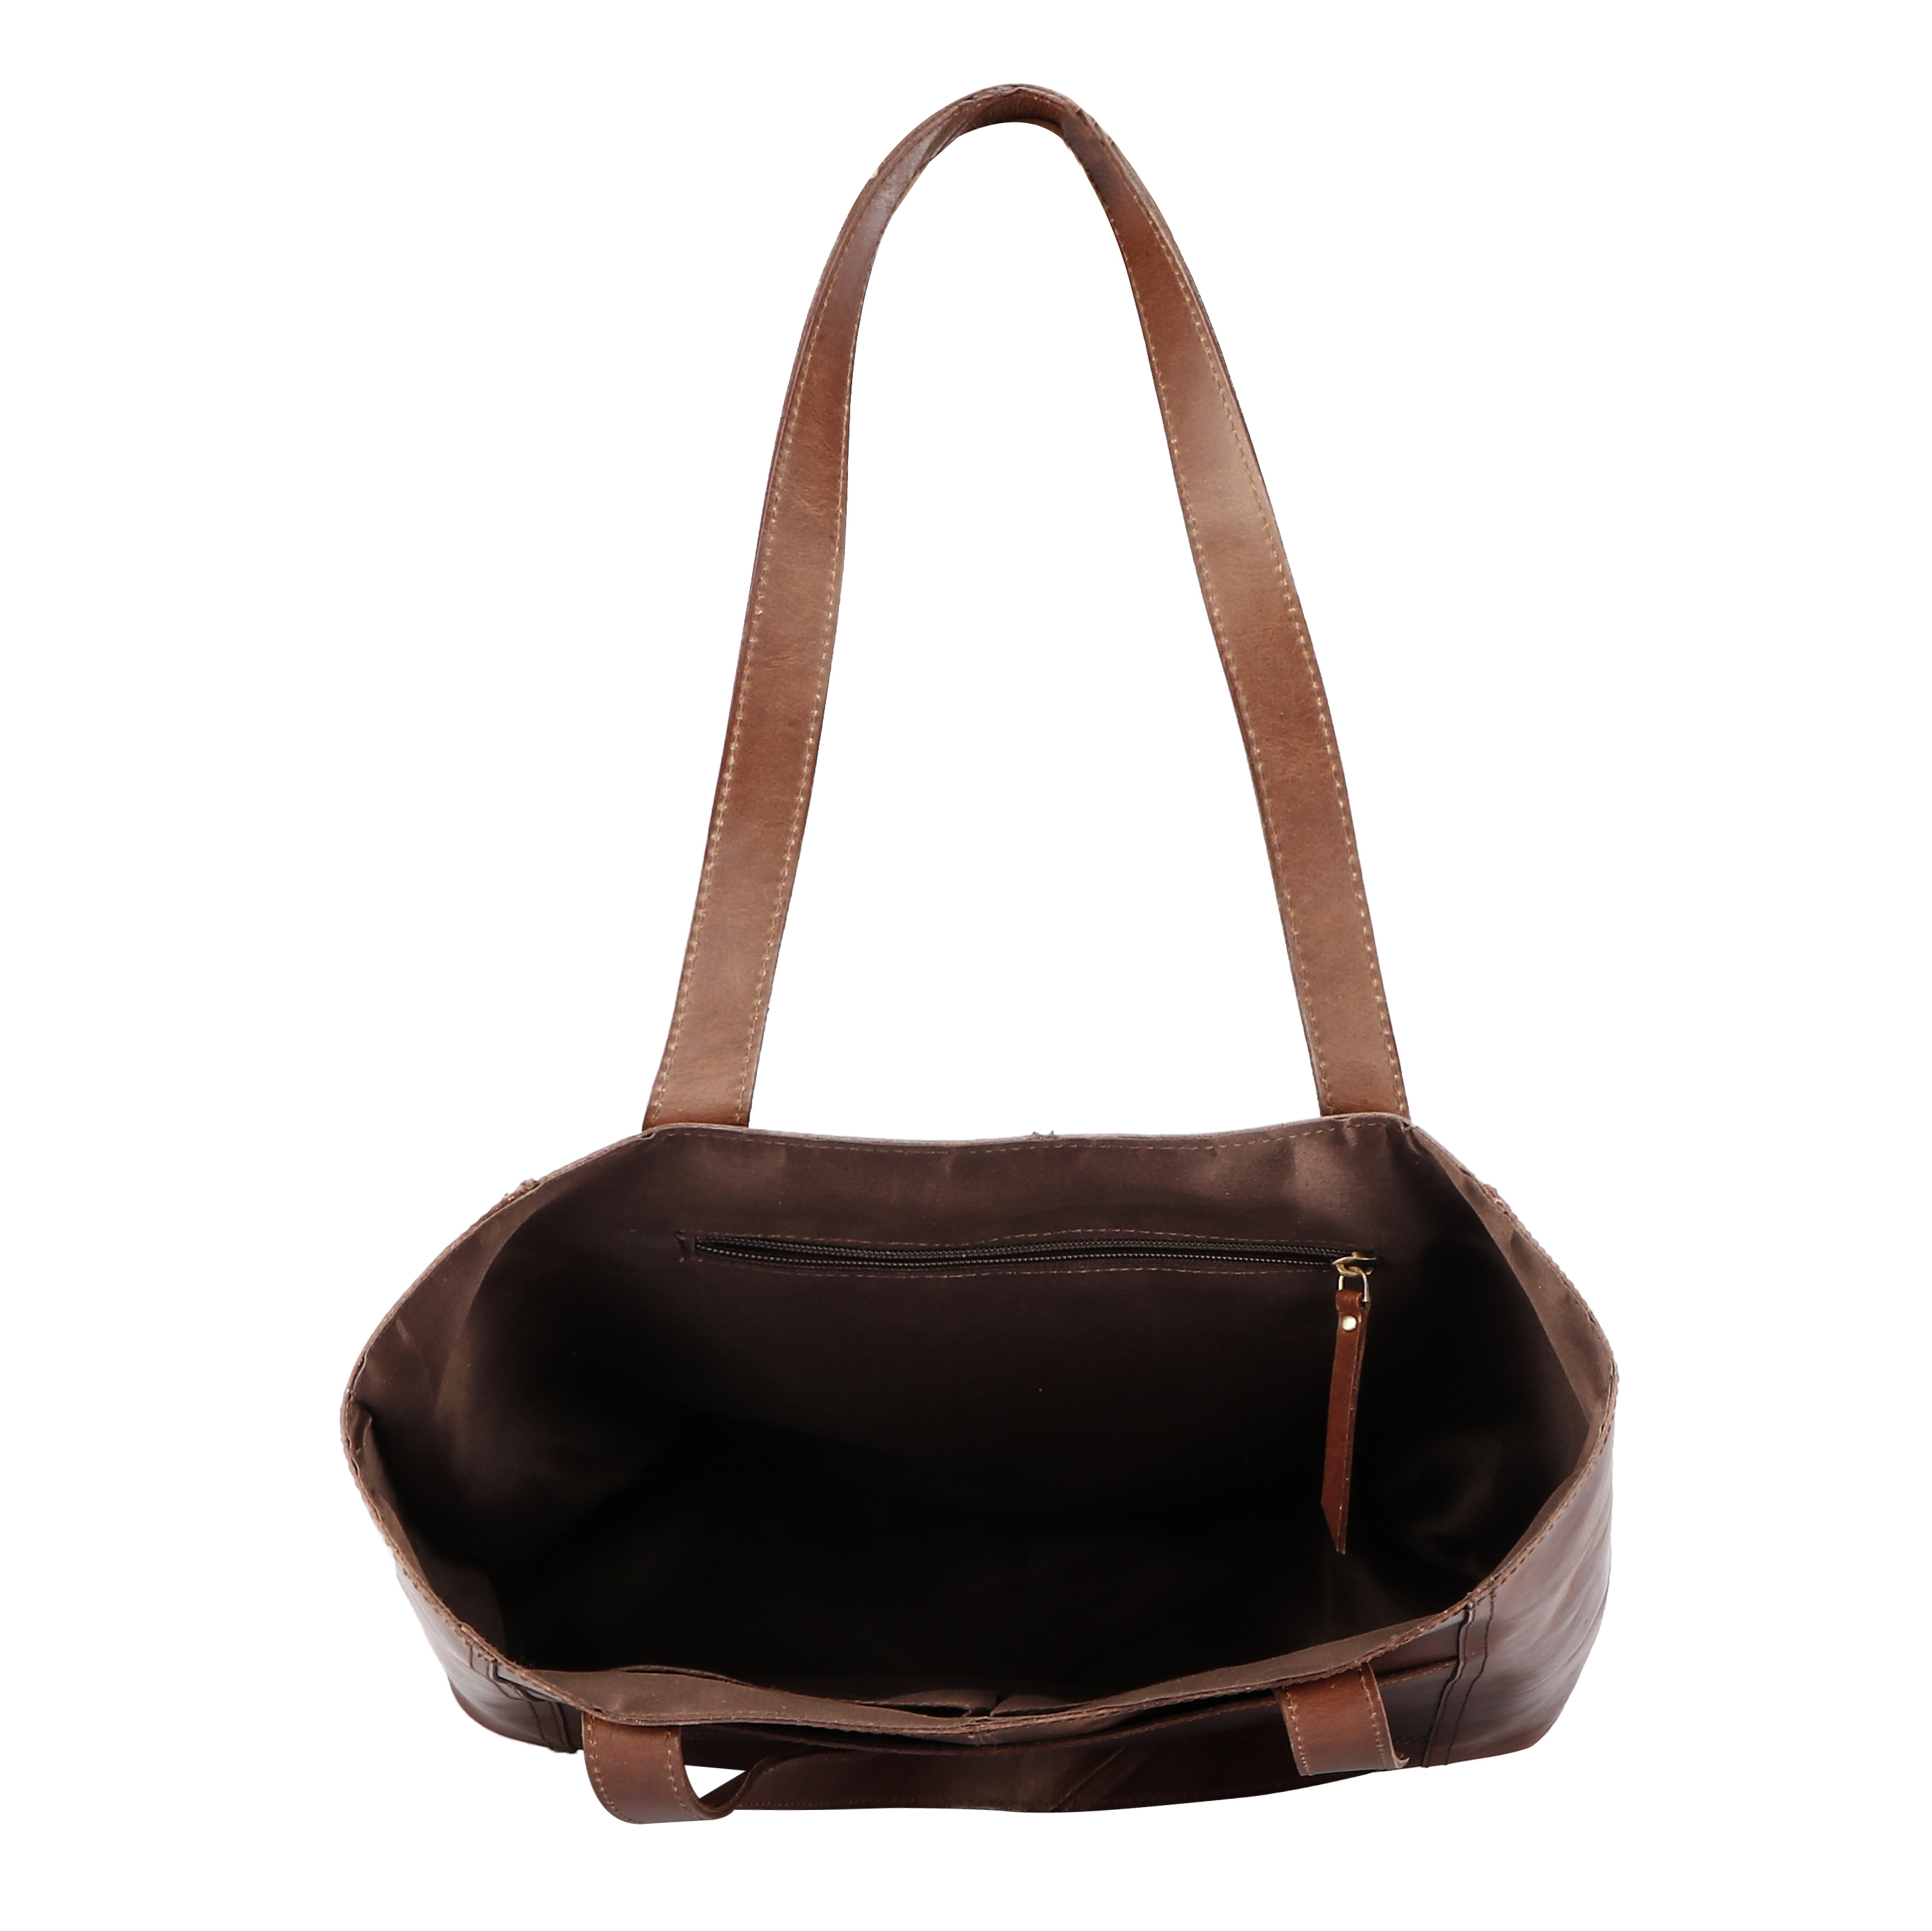 Leather Tote Bag for Women